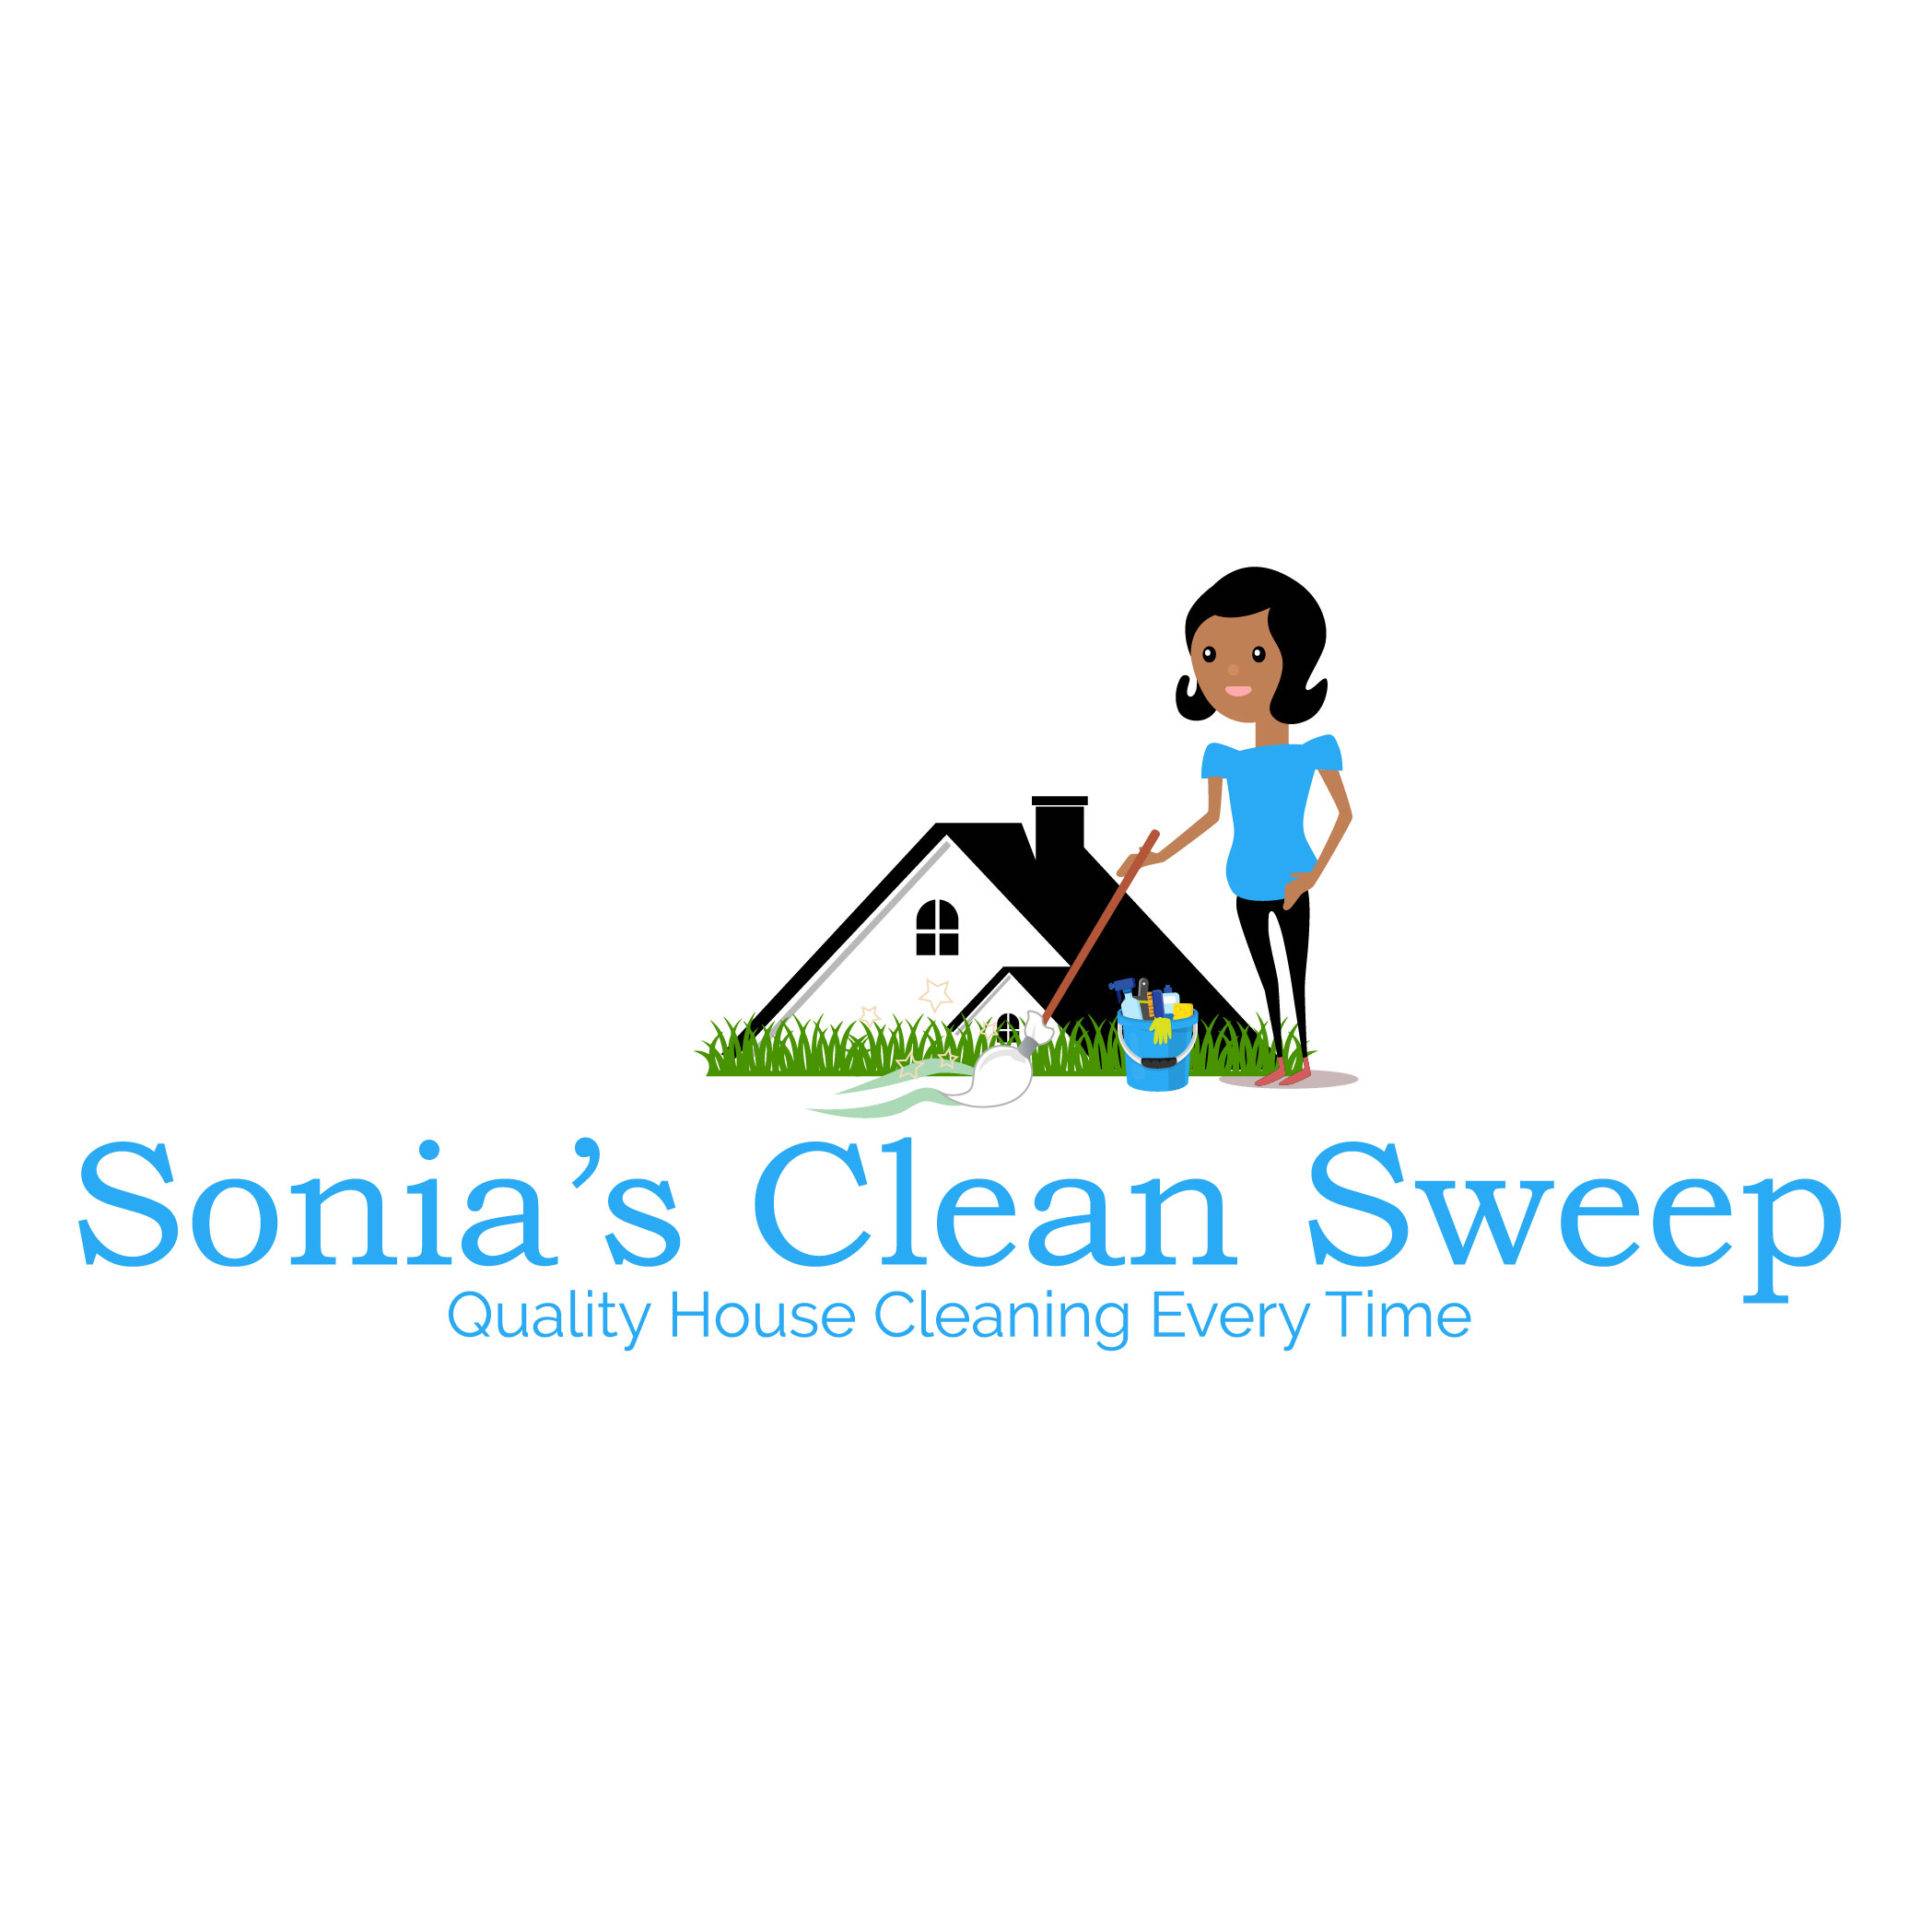 Sonia's Clean Sweep